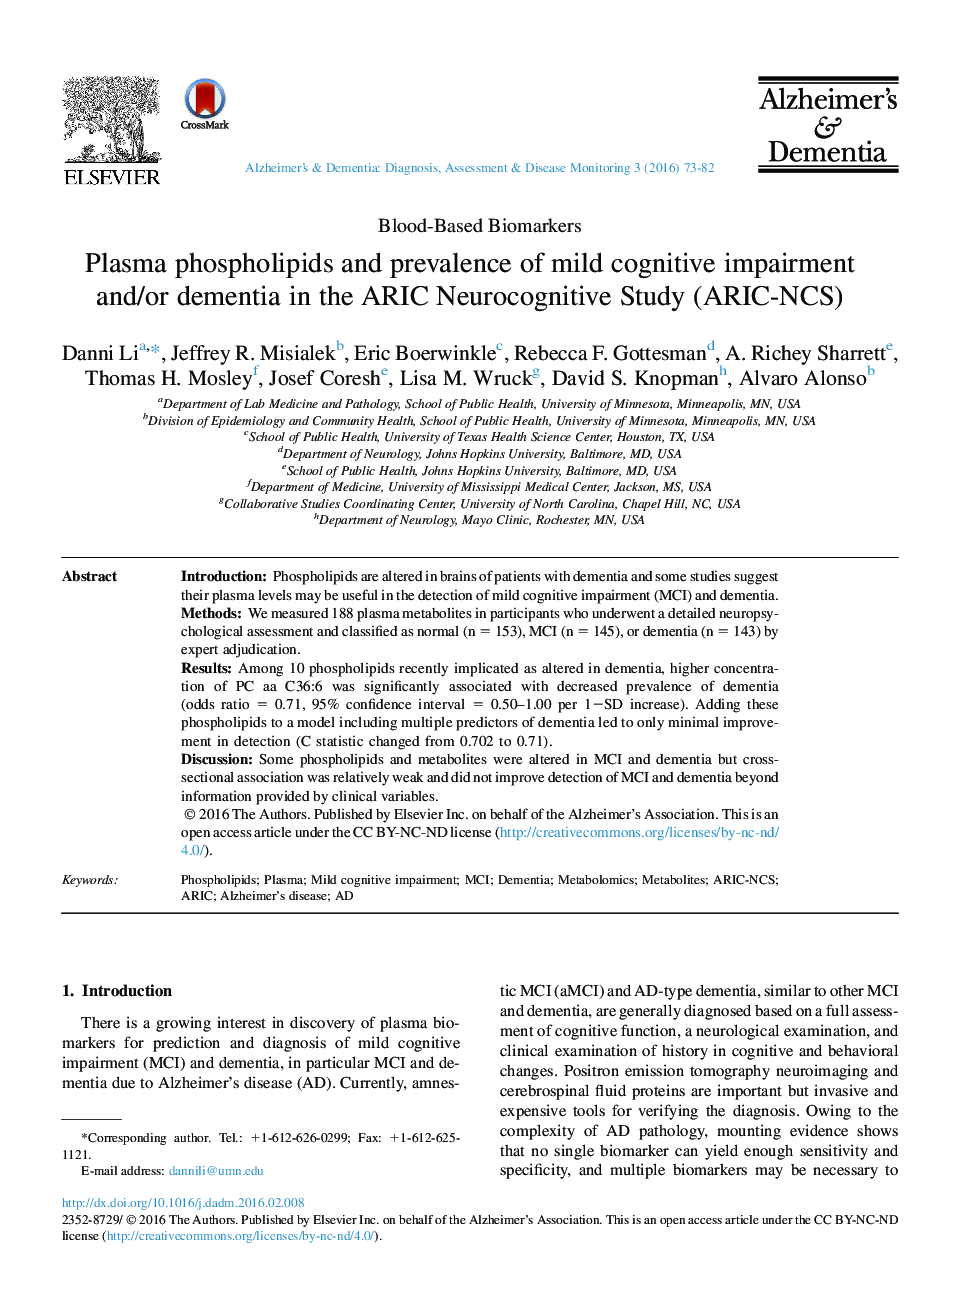 Plasma phospholipids and prevalence of mild cognitive impairment and/or dementia in the ARIC Neurocognitive Study (ARIC-NCS)